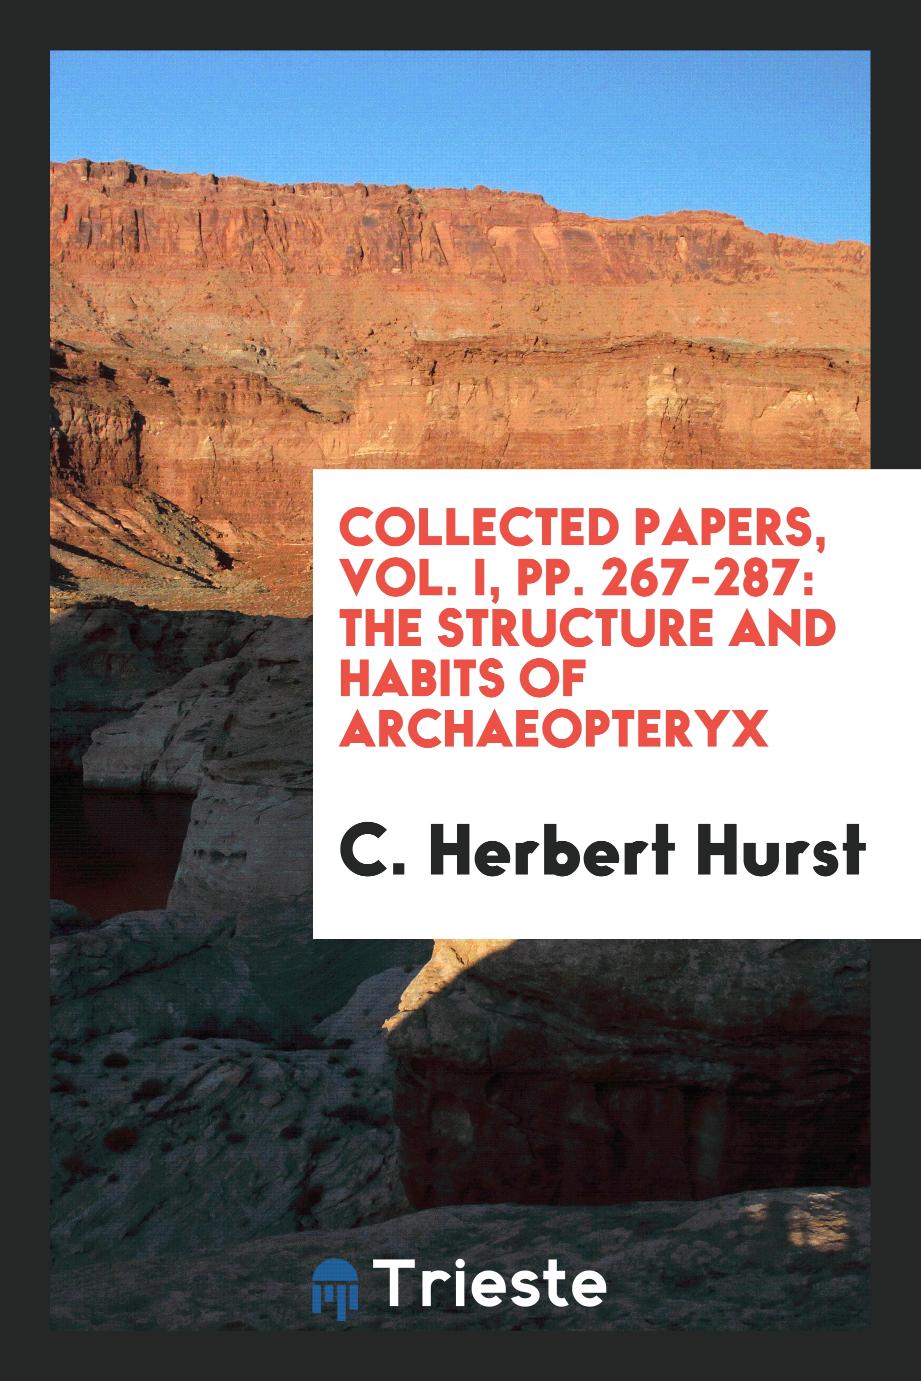 Collected papers, Vol. I, pp. 267-287: The structure and habits of archaeopteryx